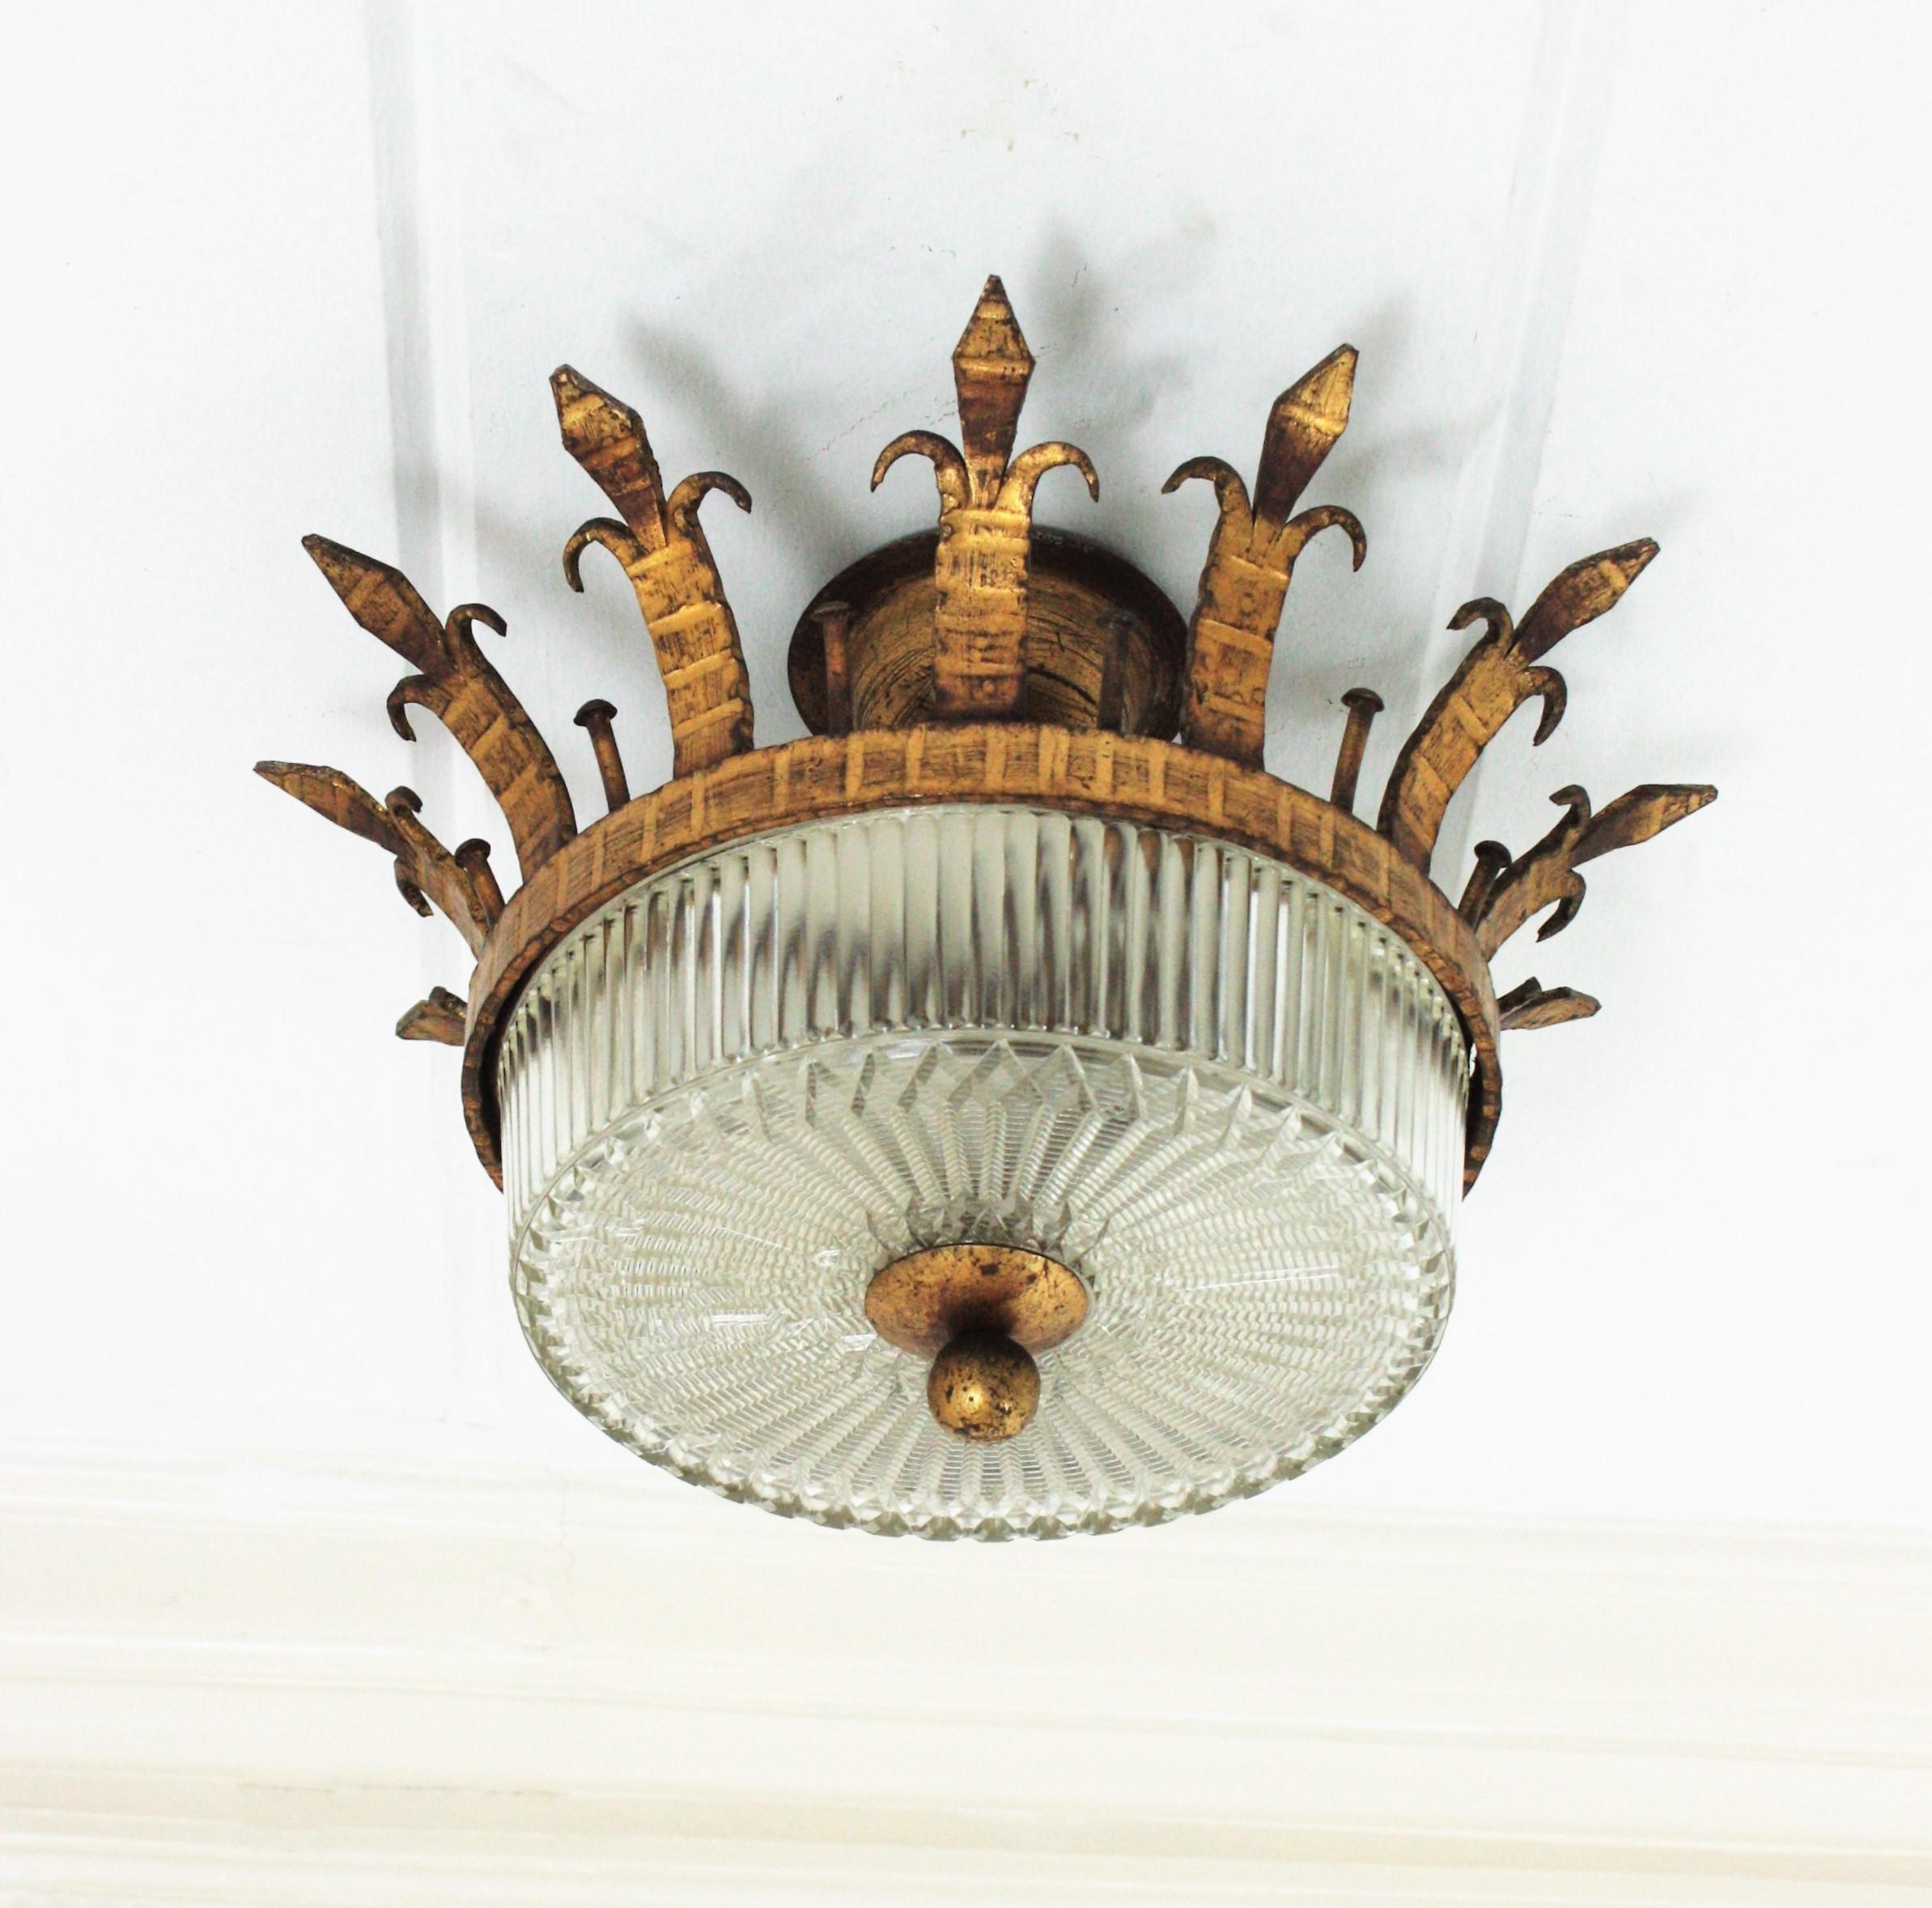 Wrought Iron and Pressed Glass Crown Flush Mount, Spain, 1930-1940s.
An sculptural hand hammered iron and glass ceiling light fixture with neoclassical and gothic revival accents. 
This hand forged and gilded iron crown sunburst light fixture has